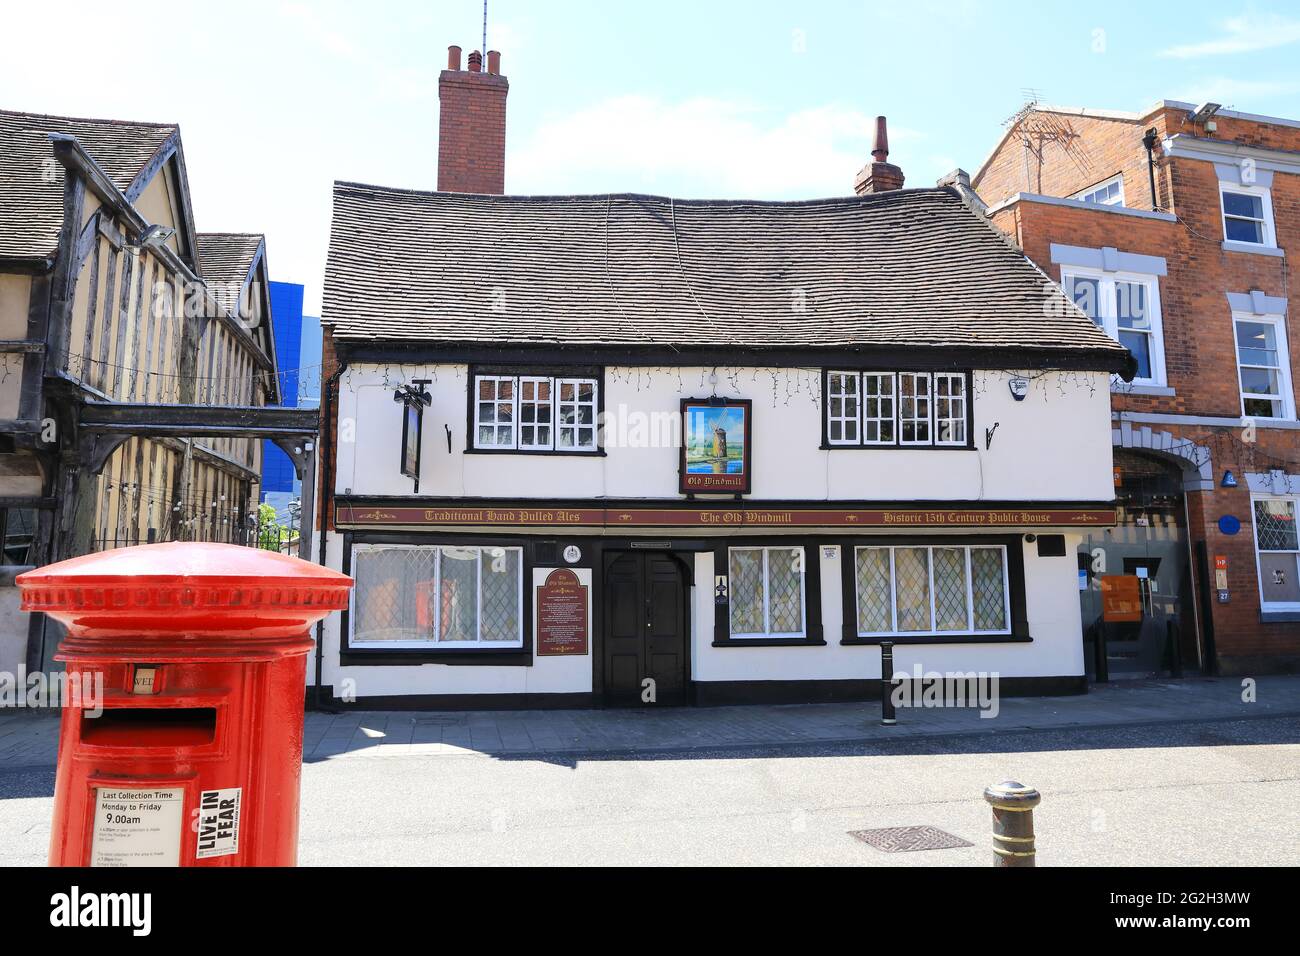 Thr Old Windmill, the city's oldest and best known pub, dated from 1451, on medieval Spon Street, in Coventry, UK City of Culture 2021, UK Stock Photo